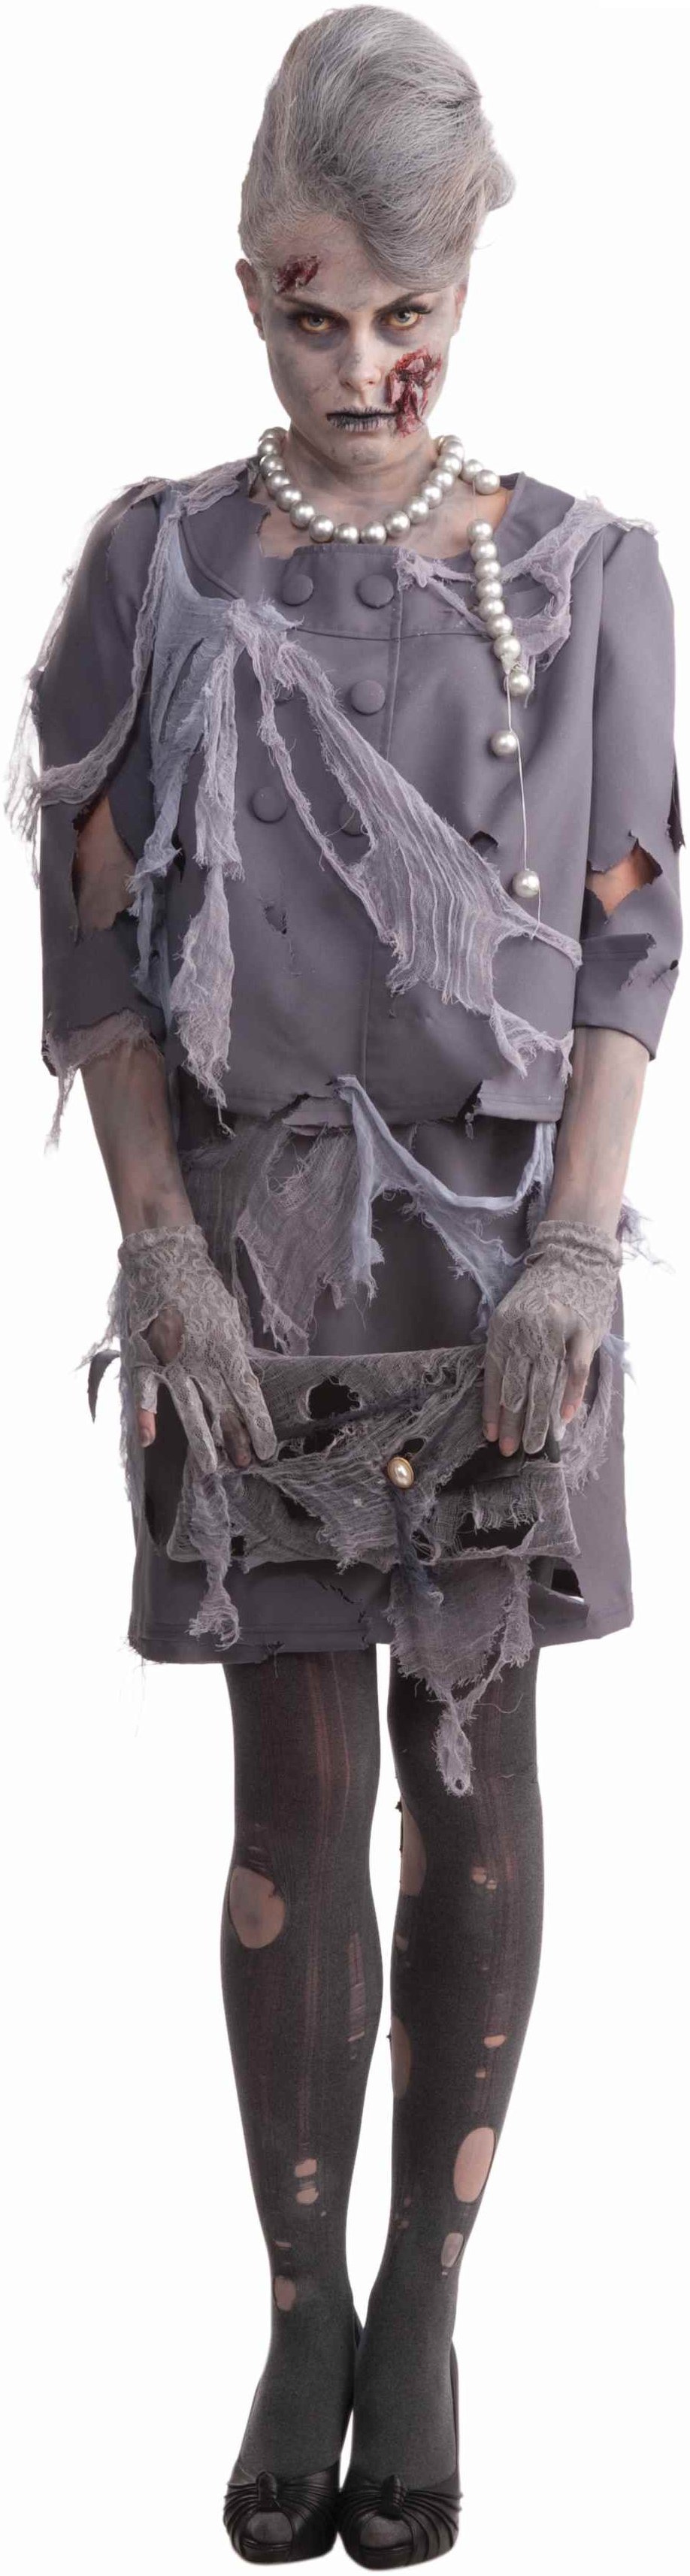 Zombie First Lady Adult Costume - Click Image to Close